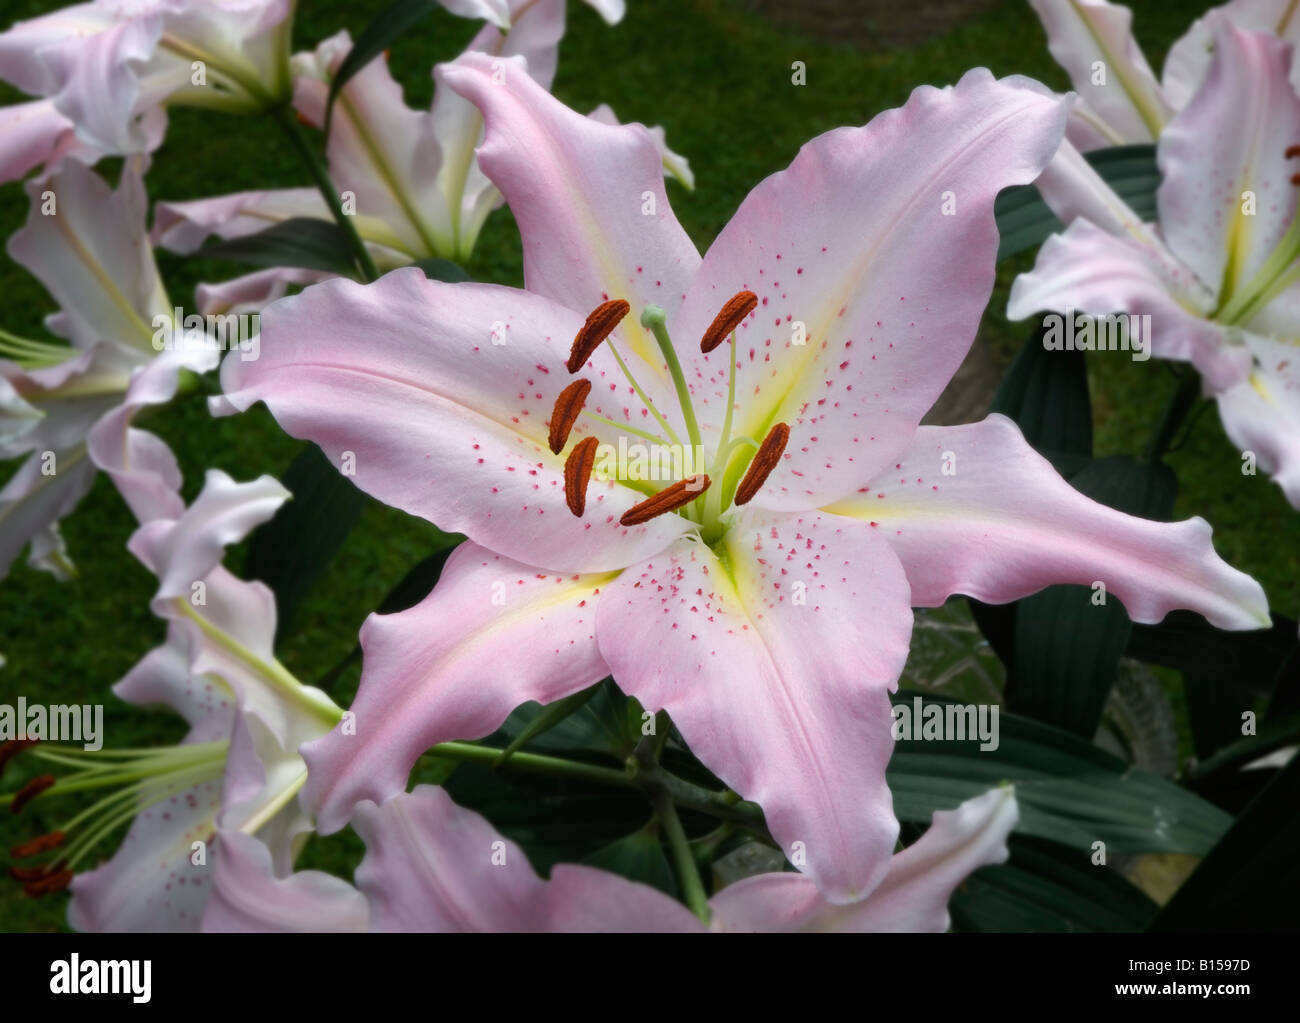 Pink lily close up Stock Photo